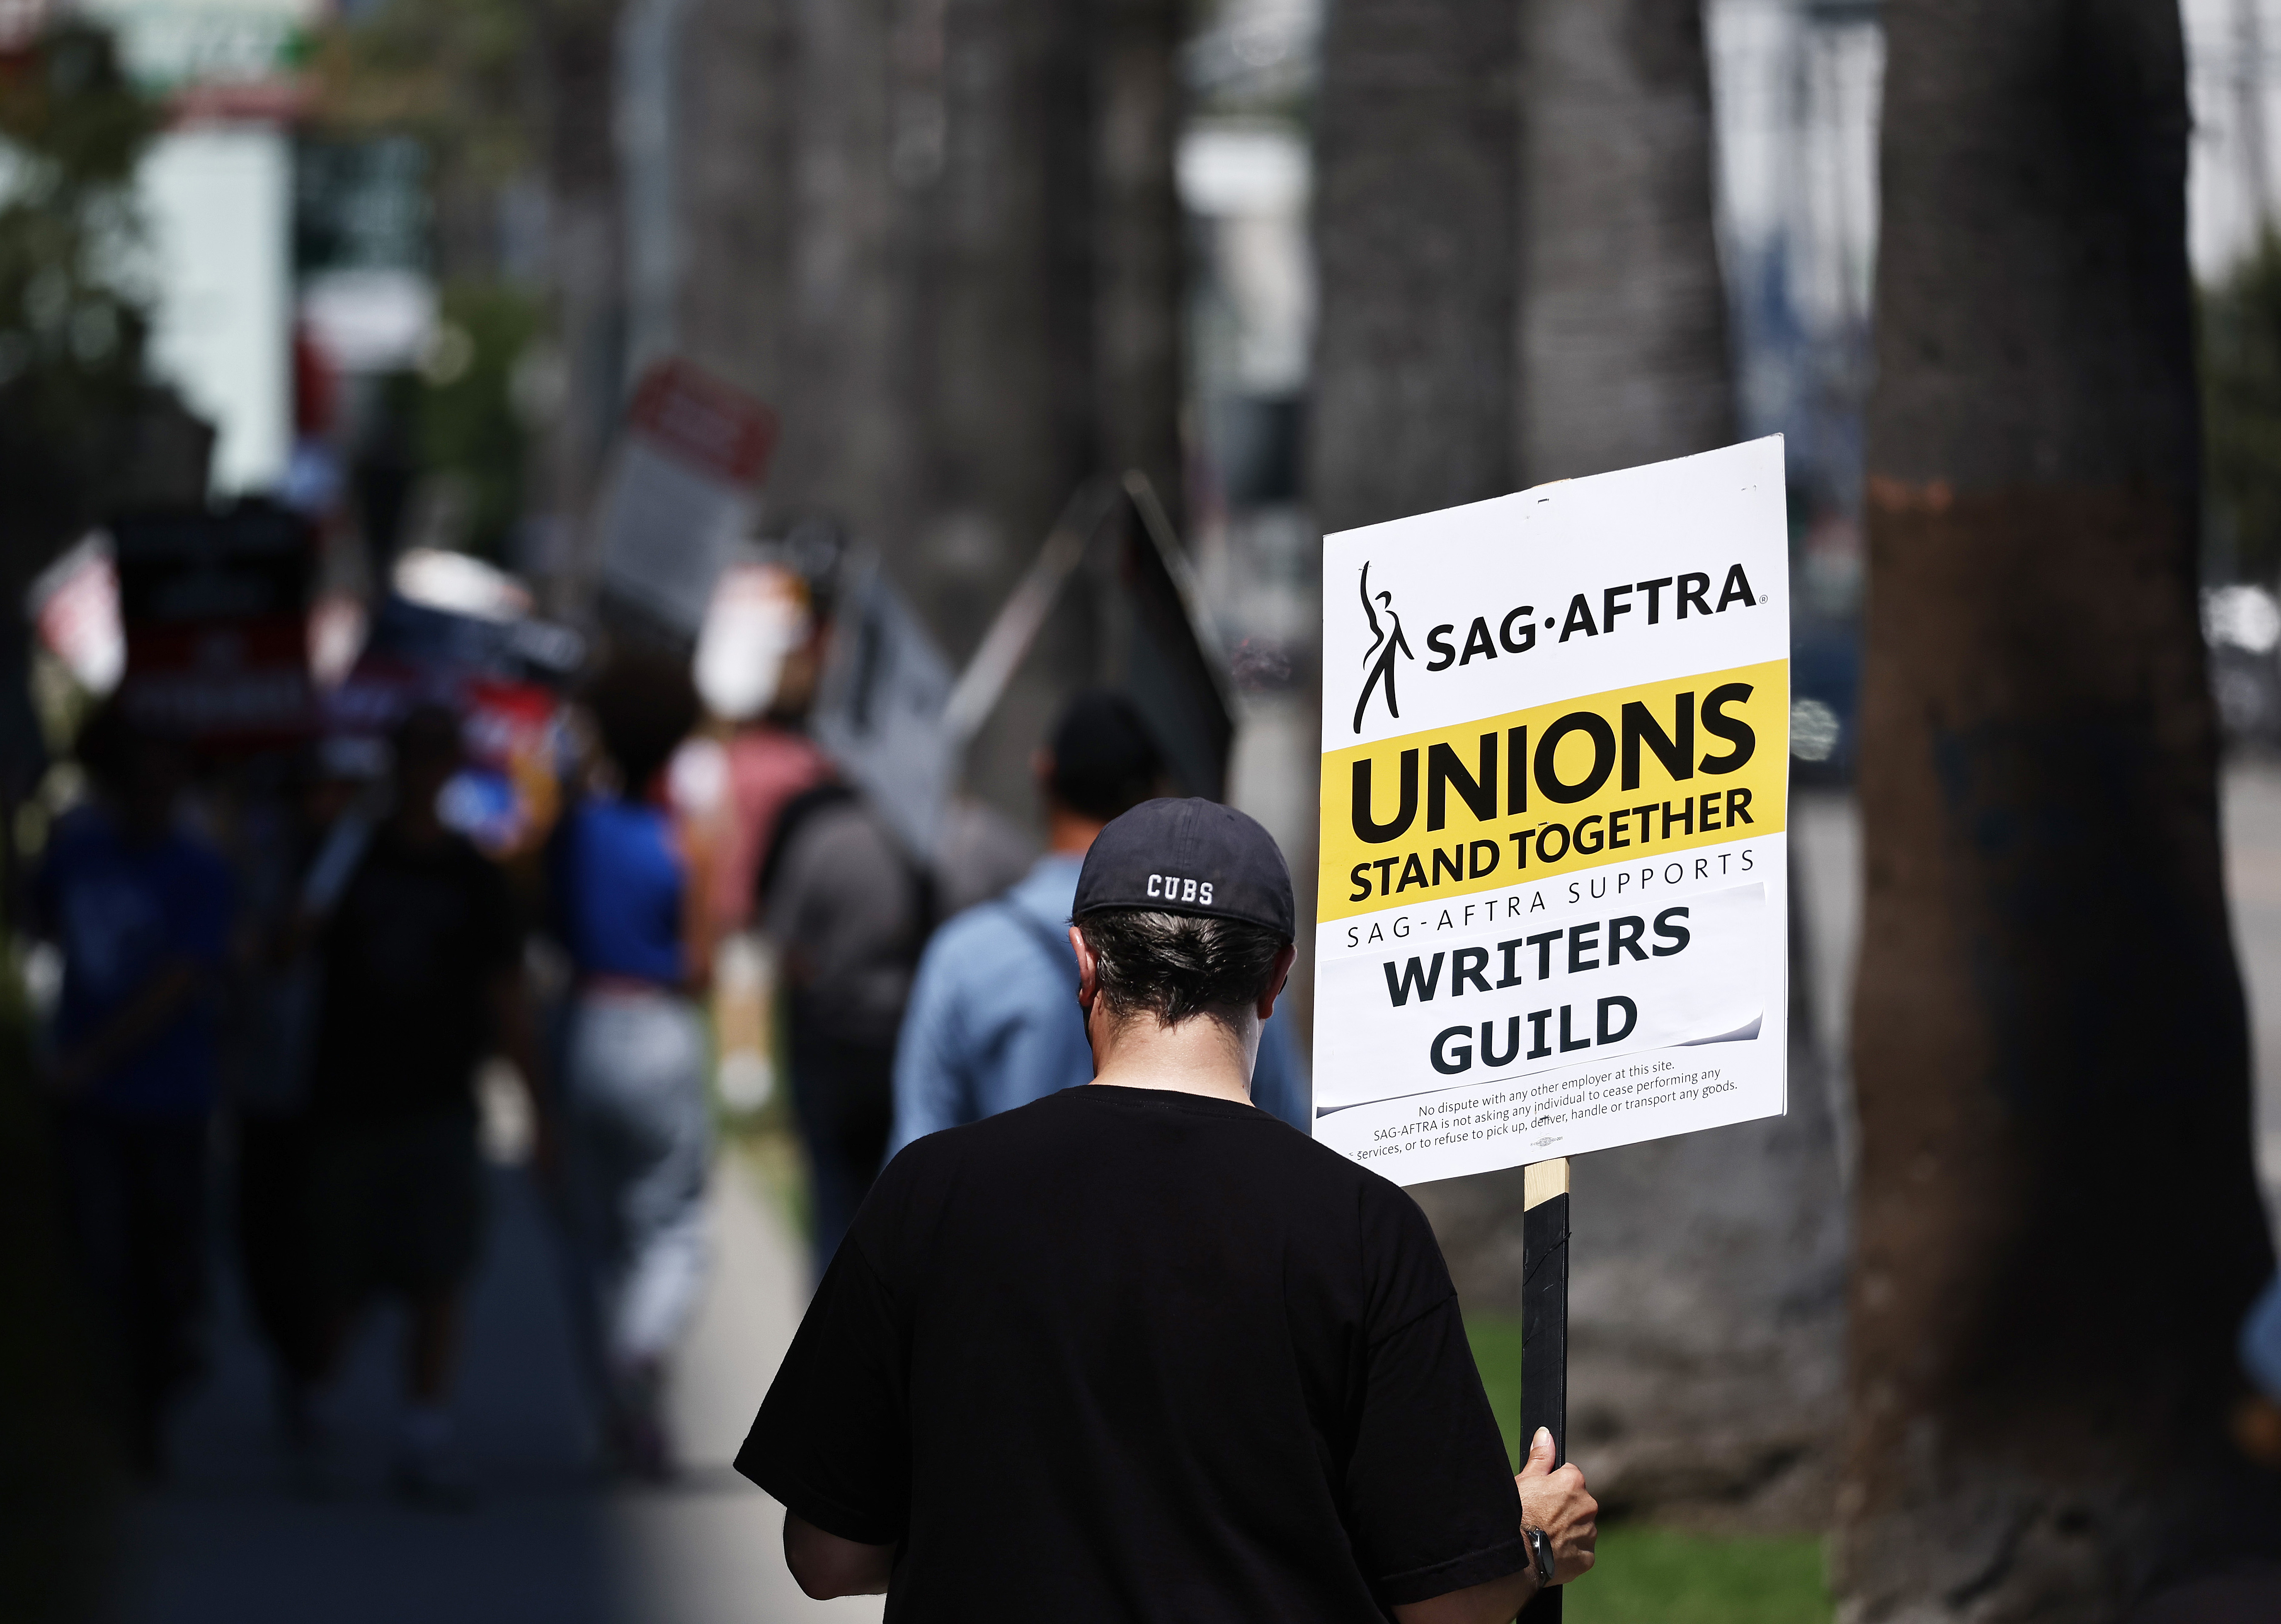 A protester holding a sign that read, “SAG-AFTRA unions stand together.”